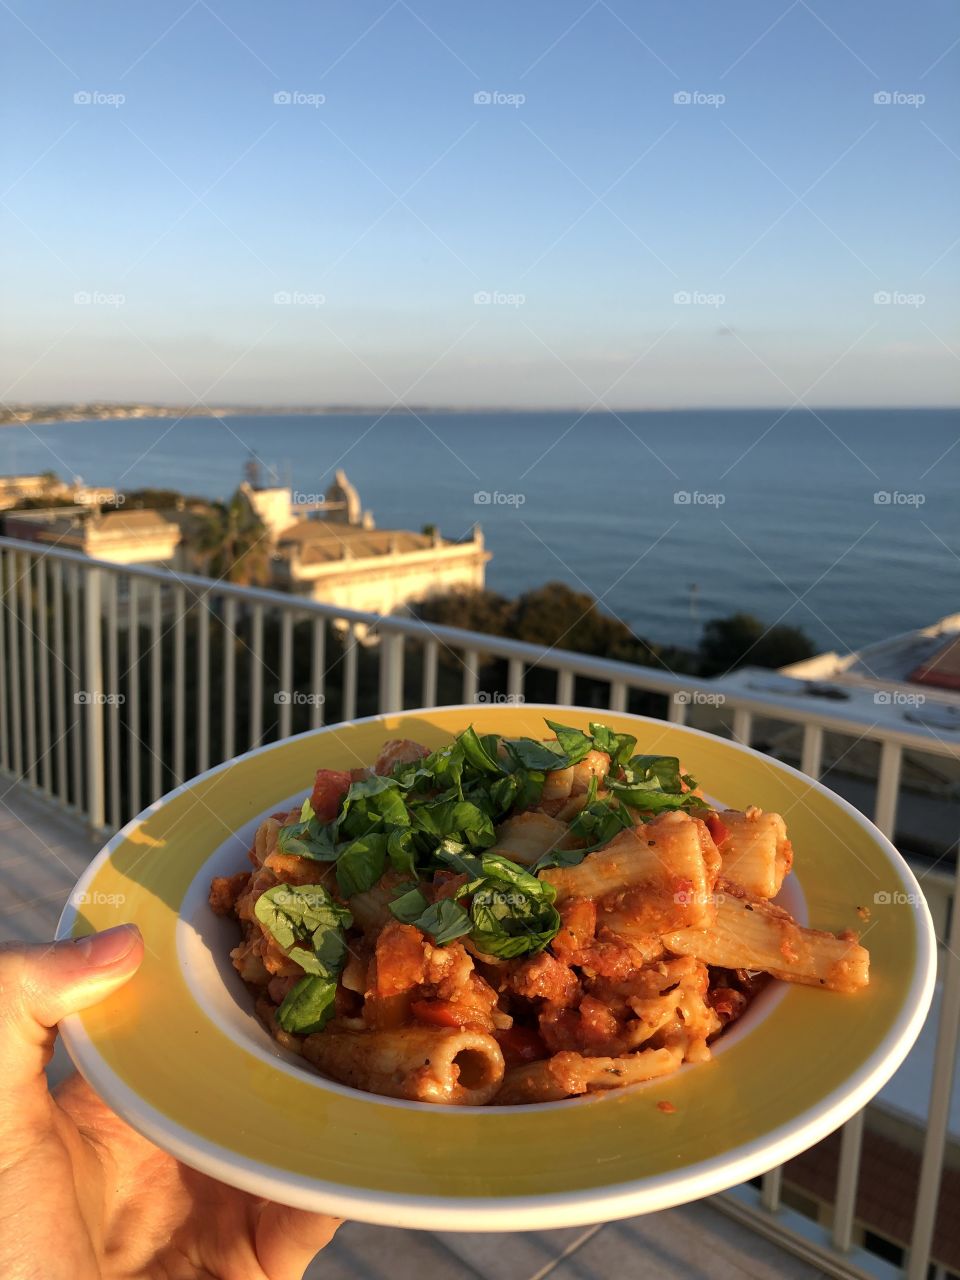 Enjoying a wonderful bowl of red pesto pasta salad with red peppers, tomatoes, chorizo (turkey), seasoned with oregano and Italian herbs in Pozzallo, Sicily (Italy) with a stunning view of the Mediterranean Sea.